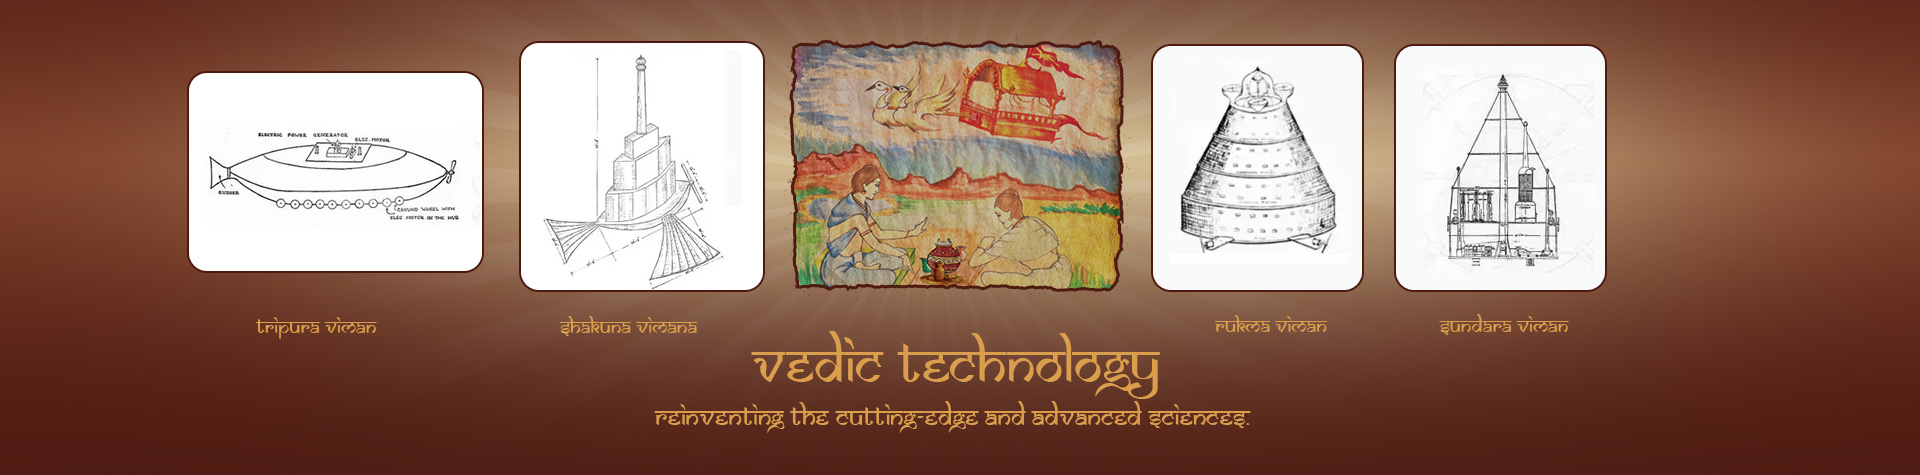 vedic science, vedic science and technology